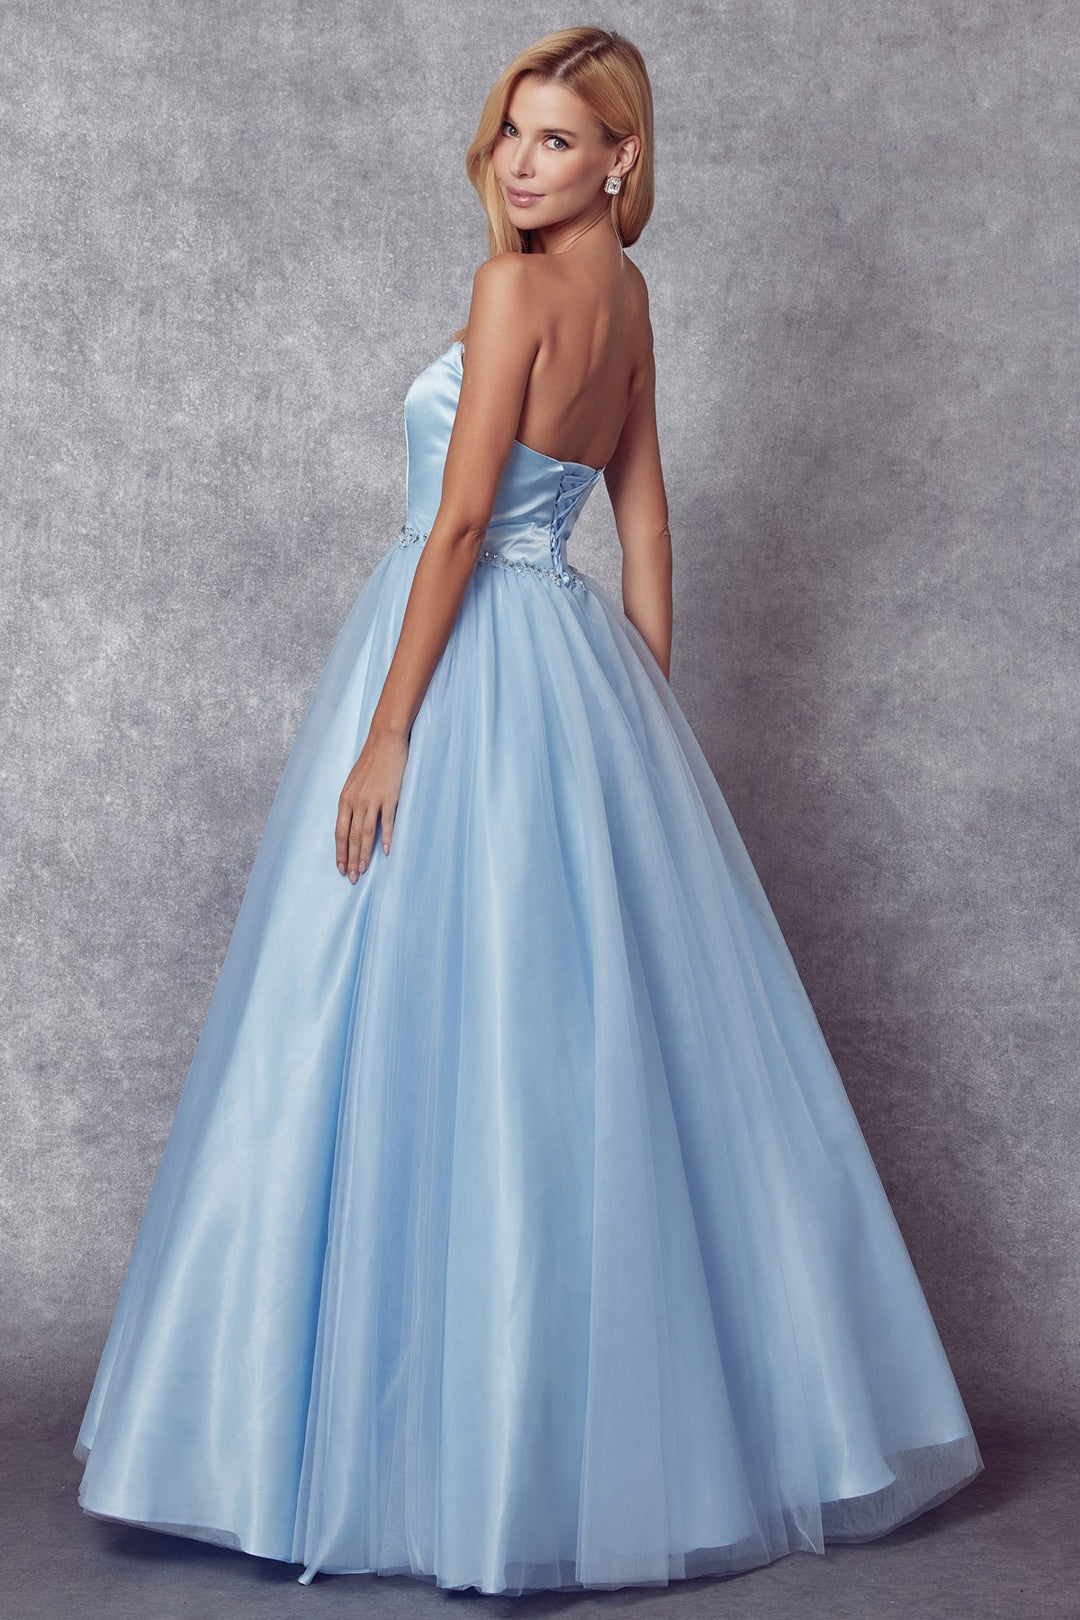 Strapless Tulle Gown with Lace-Up Back by Juliet 265